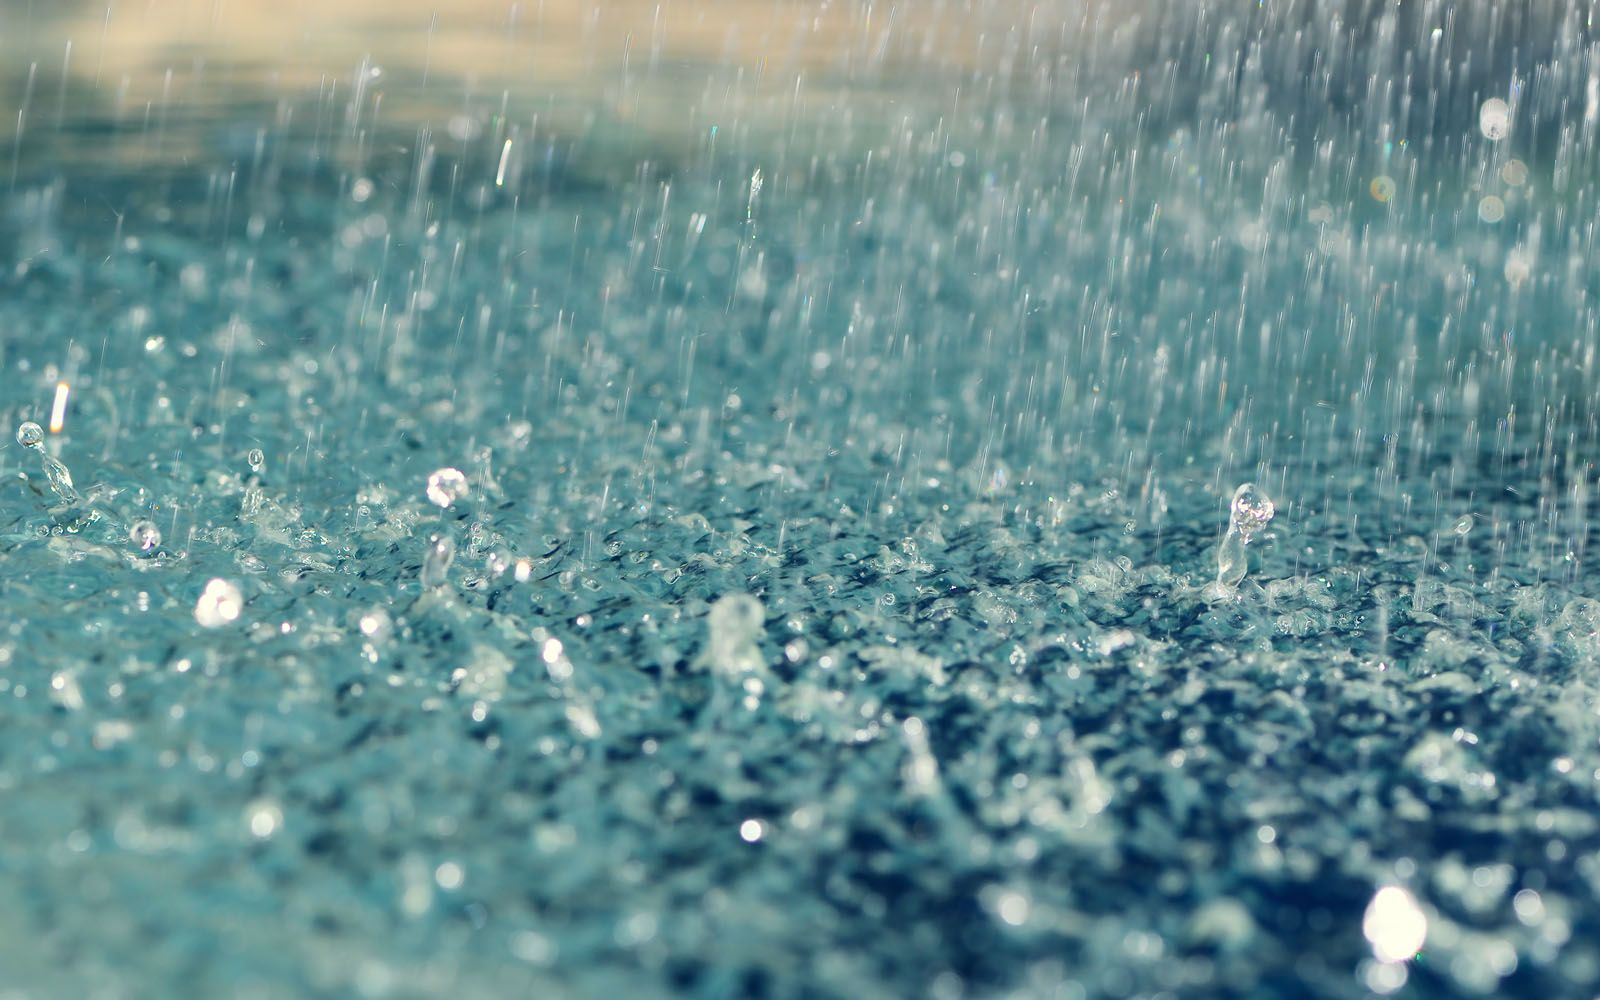 Gallery For > Rainy Day Wallpaper